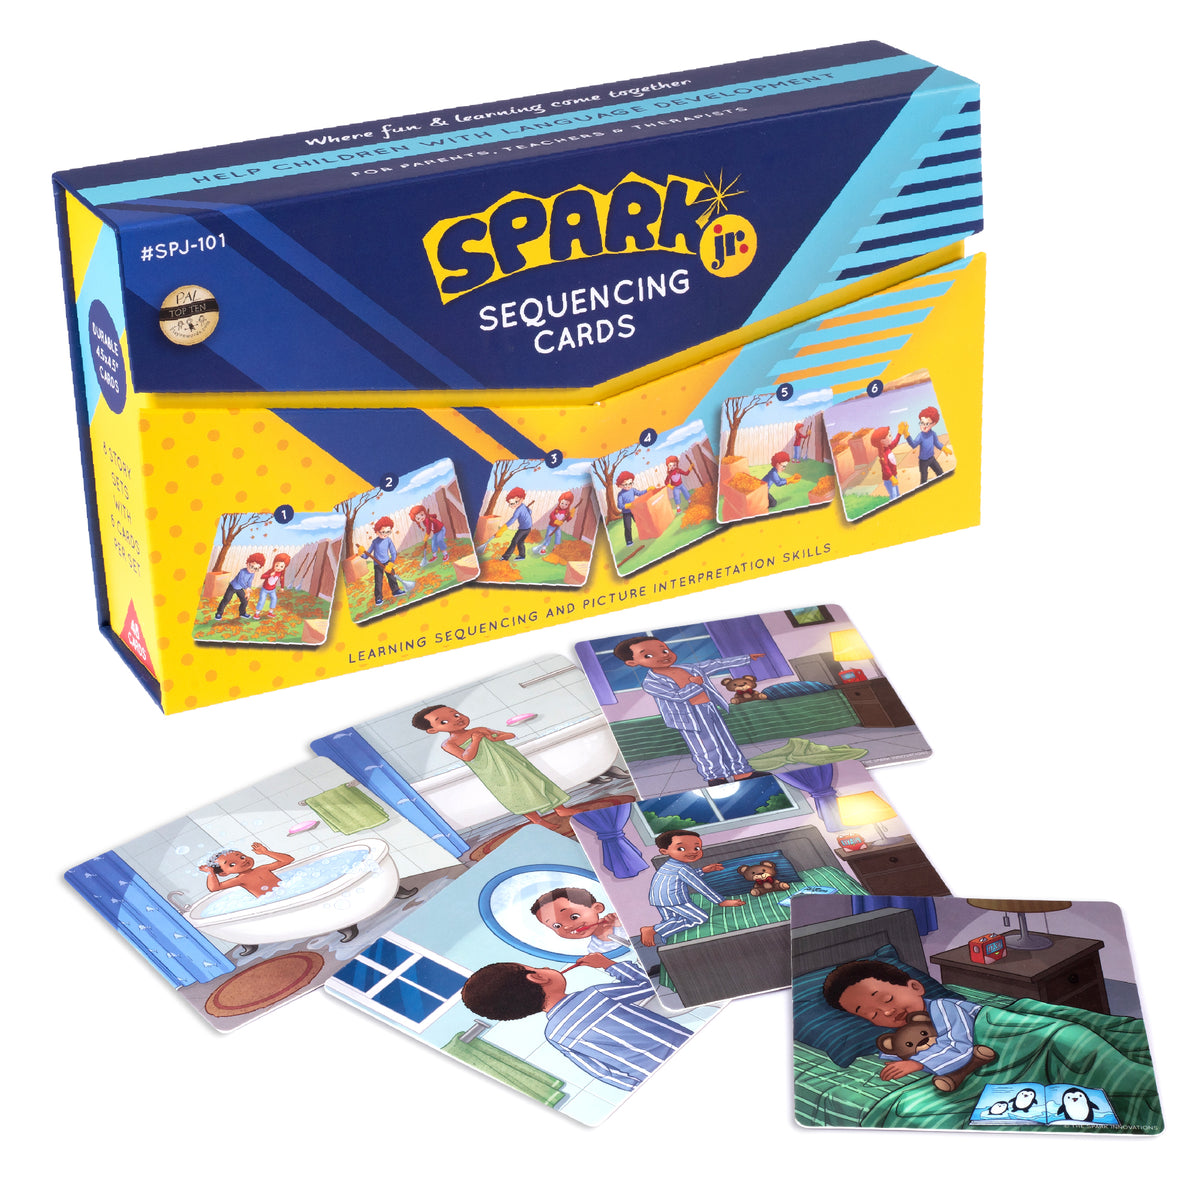 Spark Sequencing Cards - Junior – The Spark Innovations